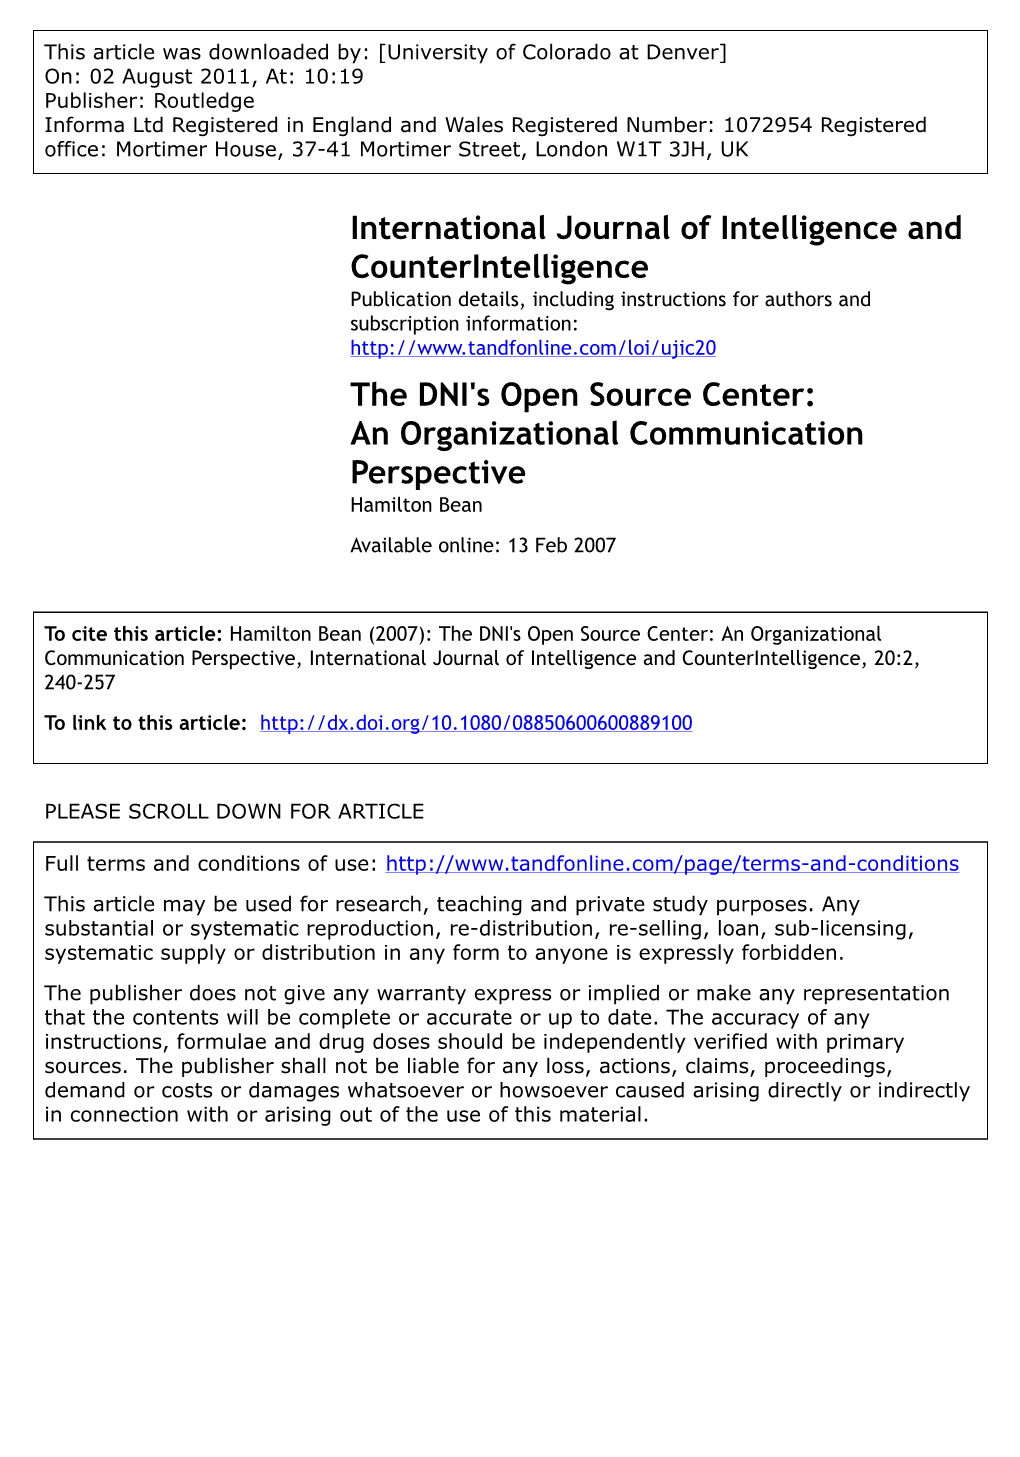 The DNI's Open Source Center: an Organizational Communication Perspective Hamilton Bean Available Online: 13 Feb 2007